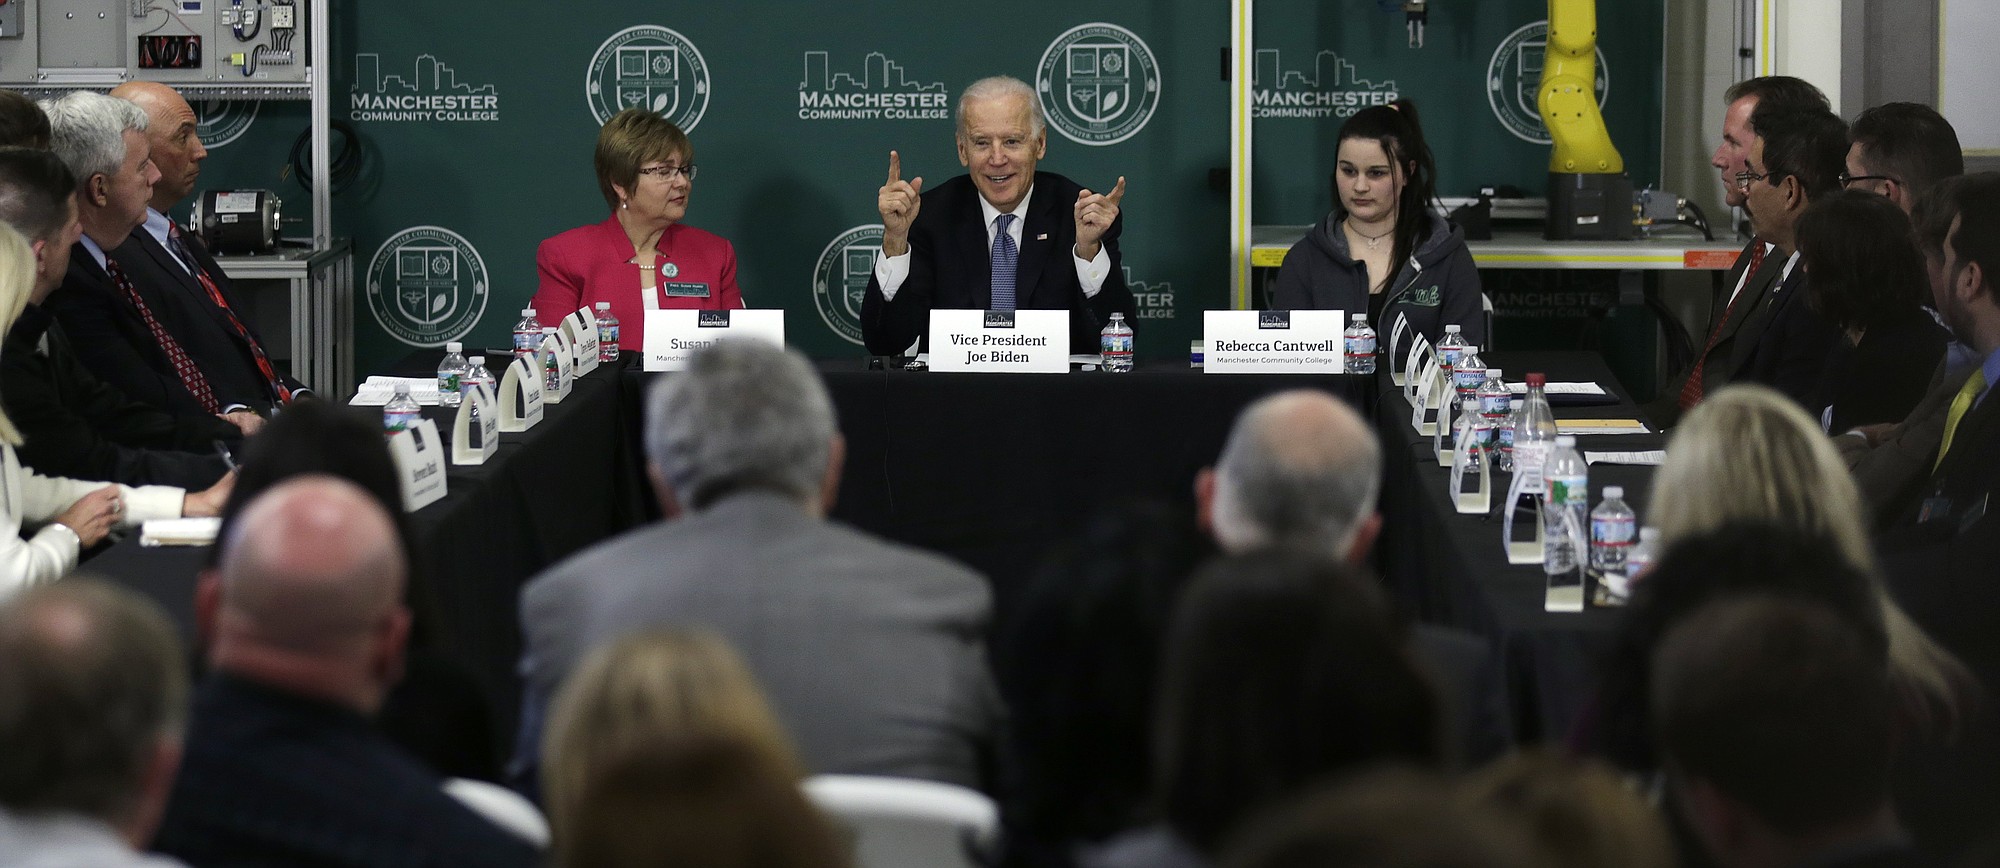 Vice President Joe Biden gestures as he addresses a gathering regarding community colleges during a visit to the Manchester Community College in Manchester, N.H., on Wednesday.